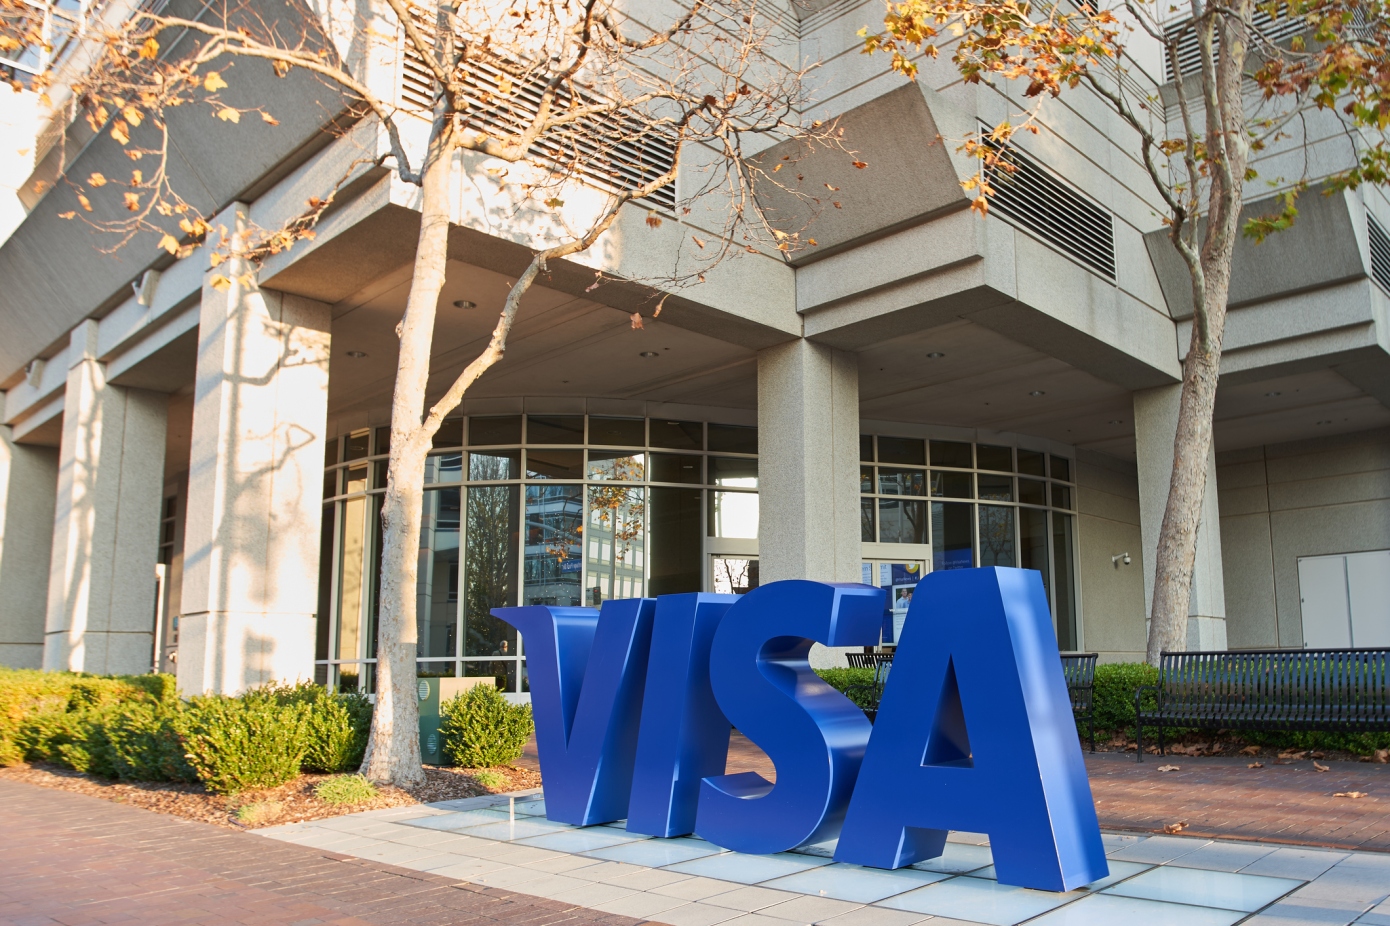 Visa launches NFT program as it considers the digital art a new form of ecommerce